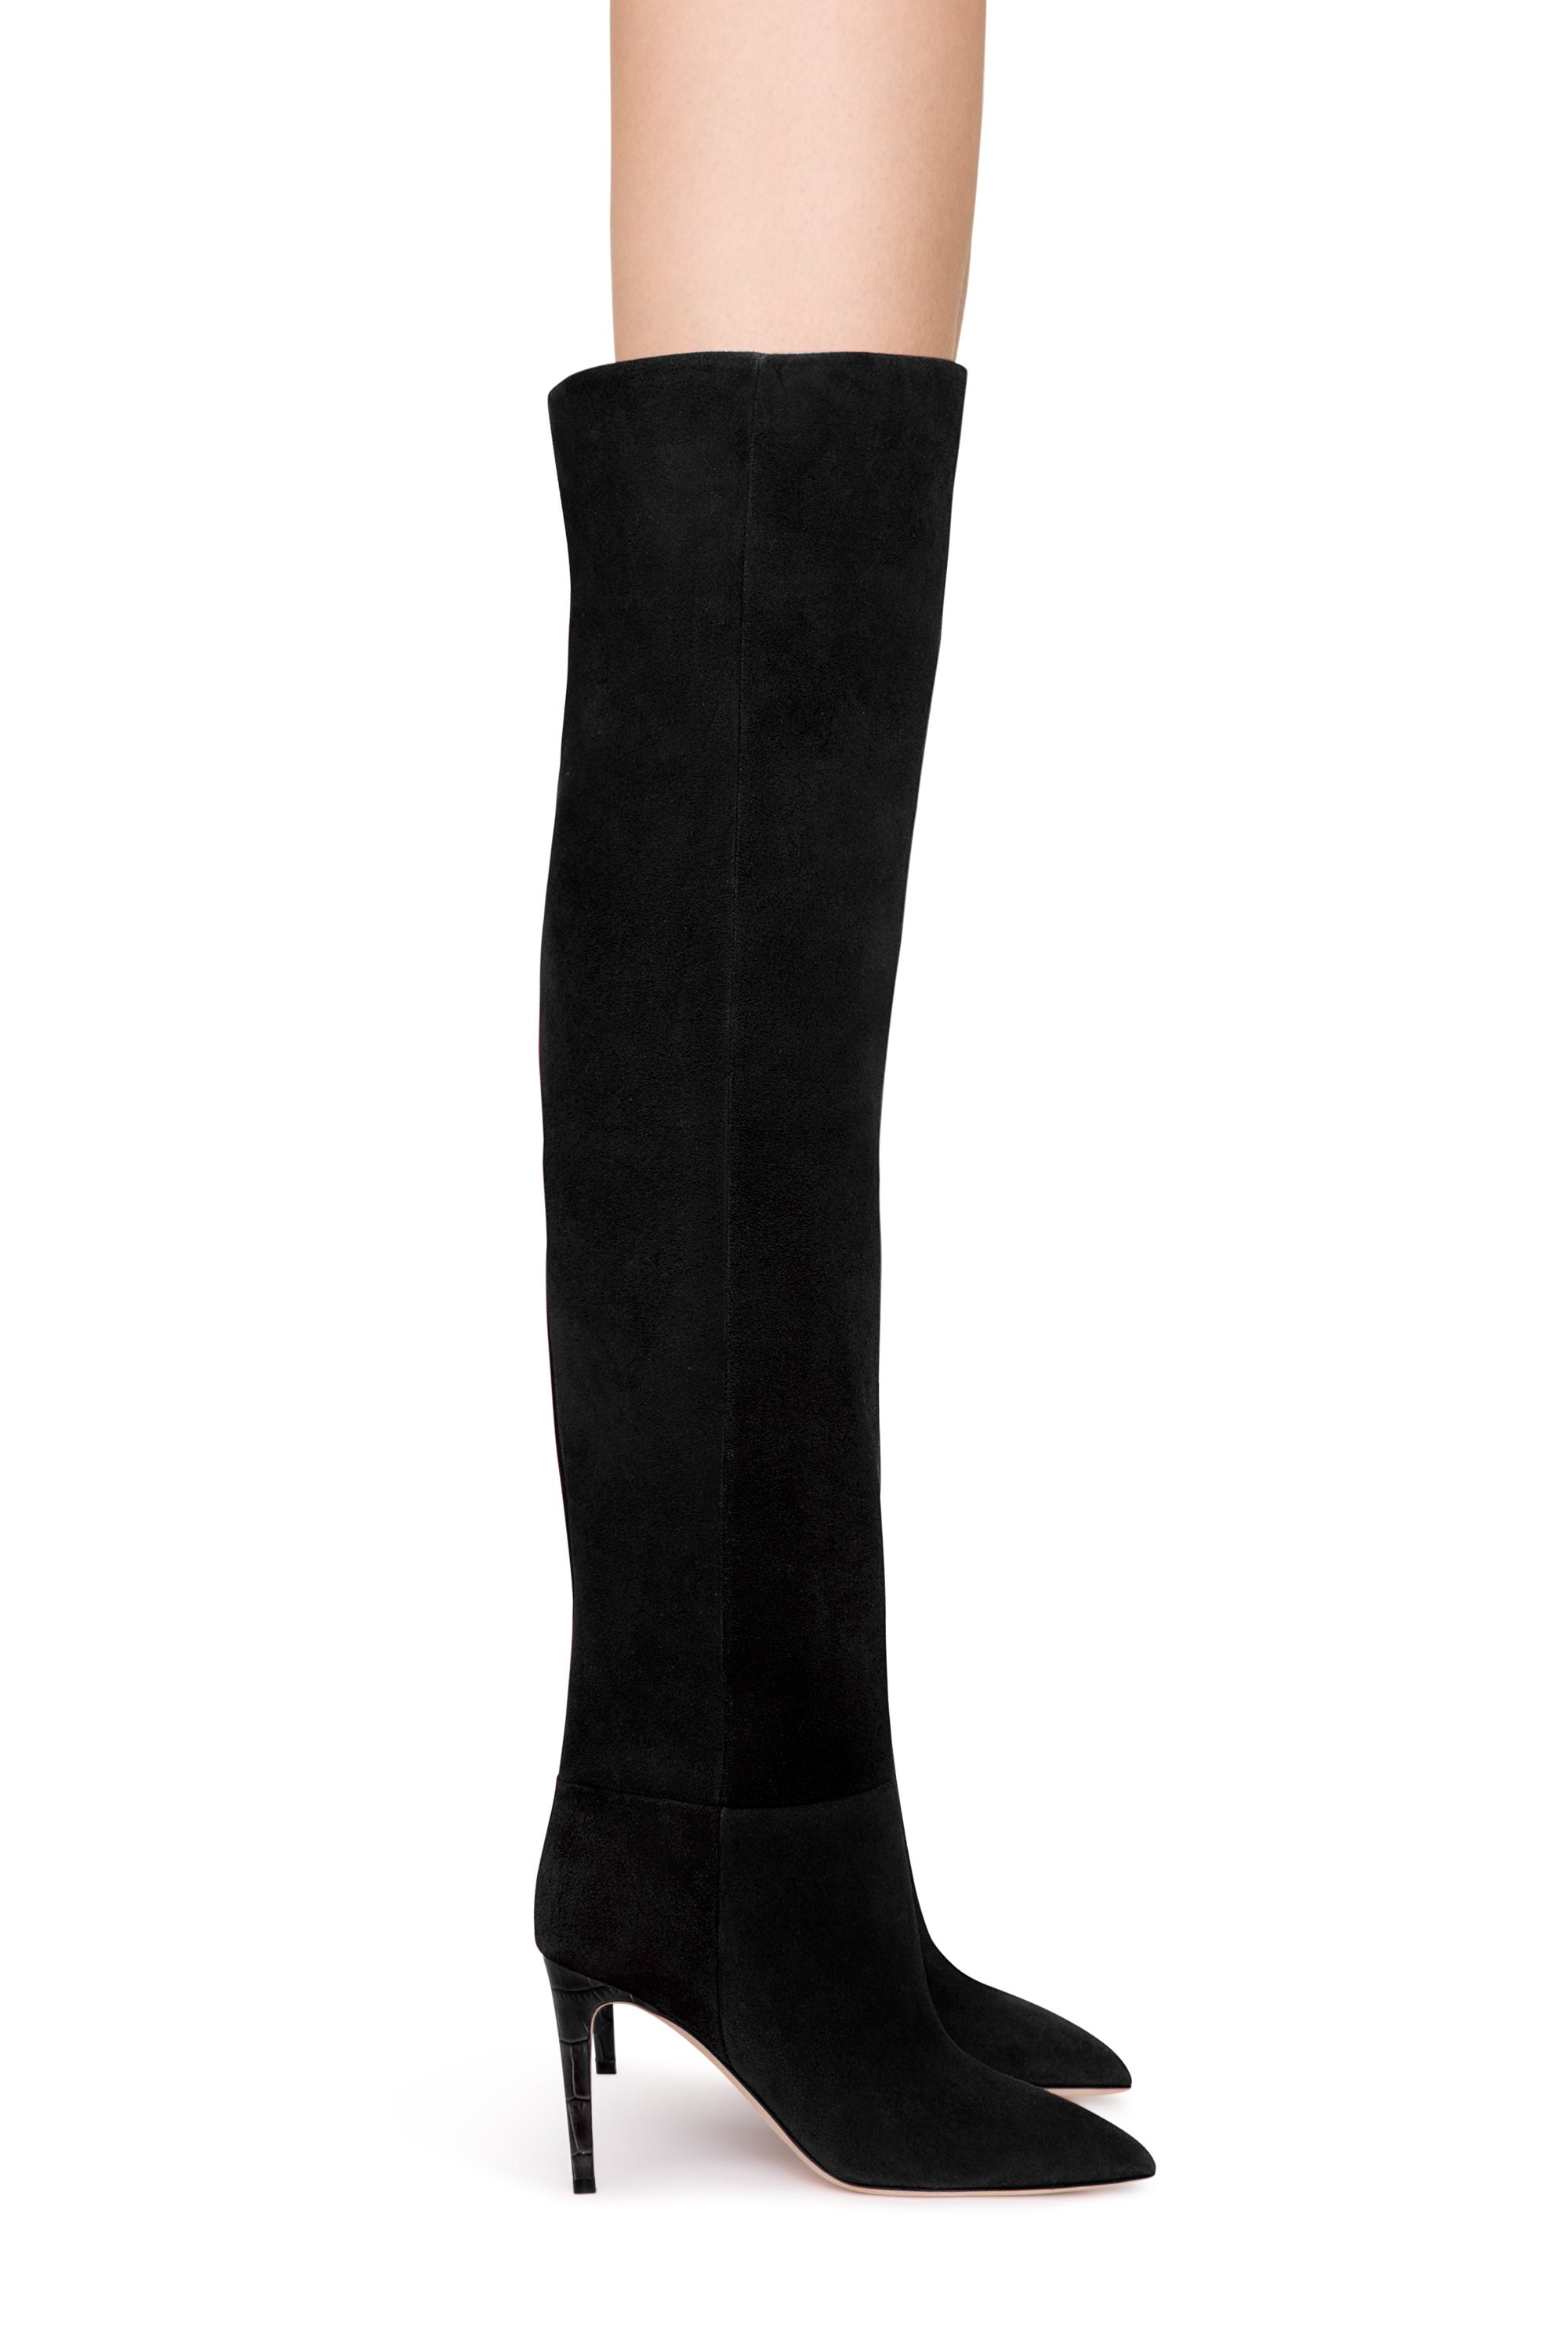 OVER THE KNEE BOOTS – Paris Texas